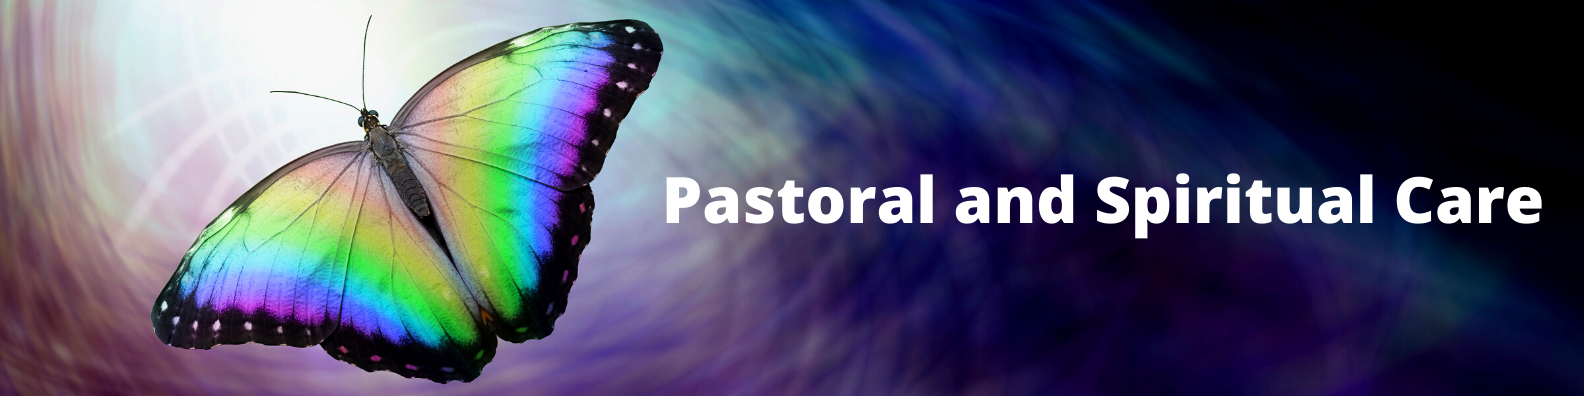 A colourful, iridescent butterfly appears against an indigo background. The words 